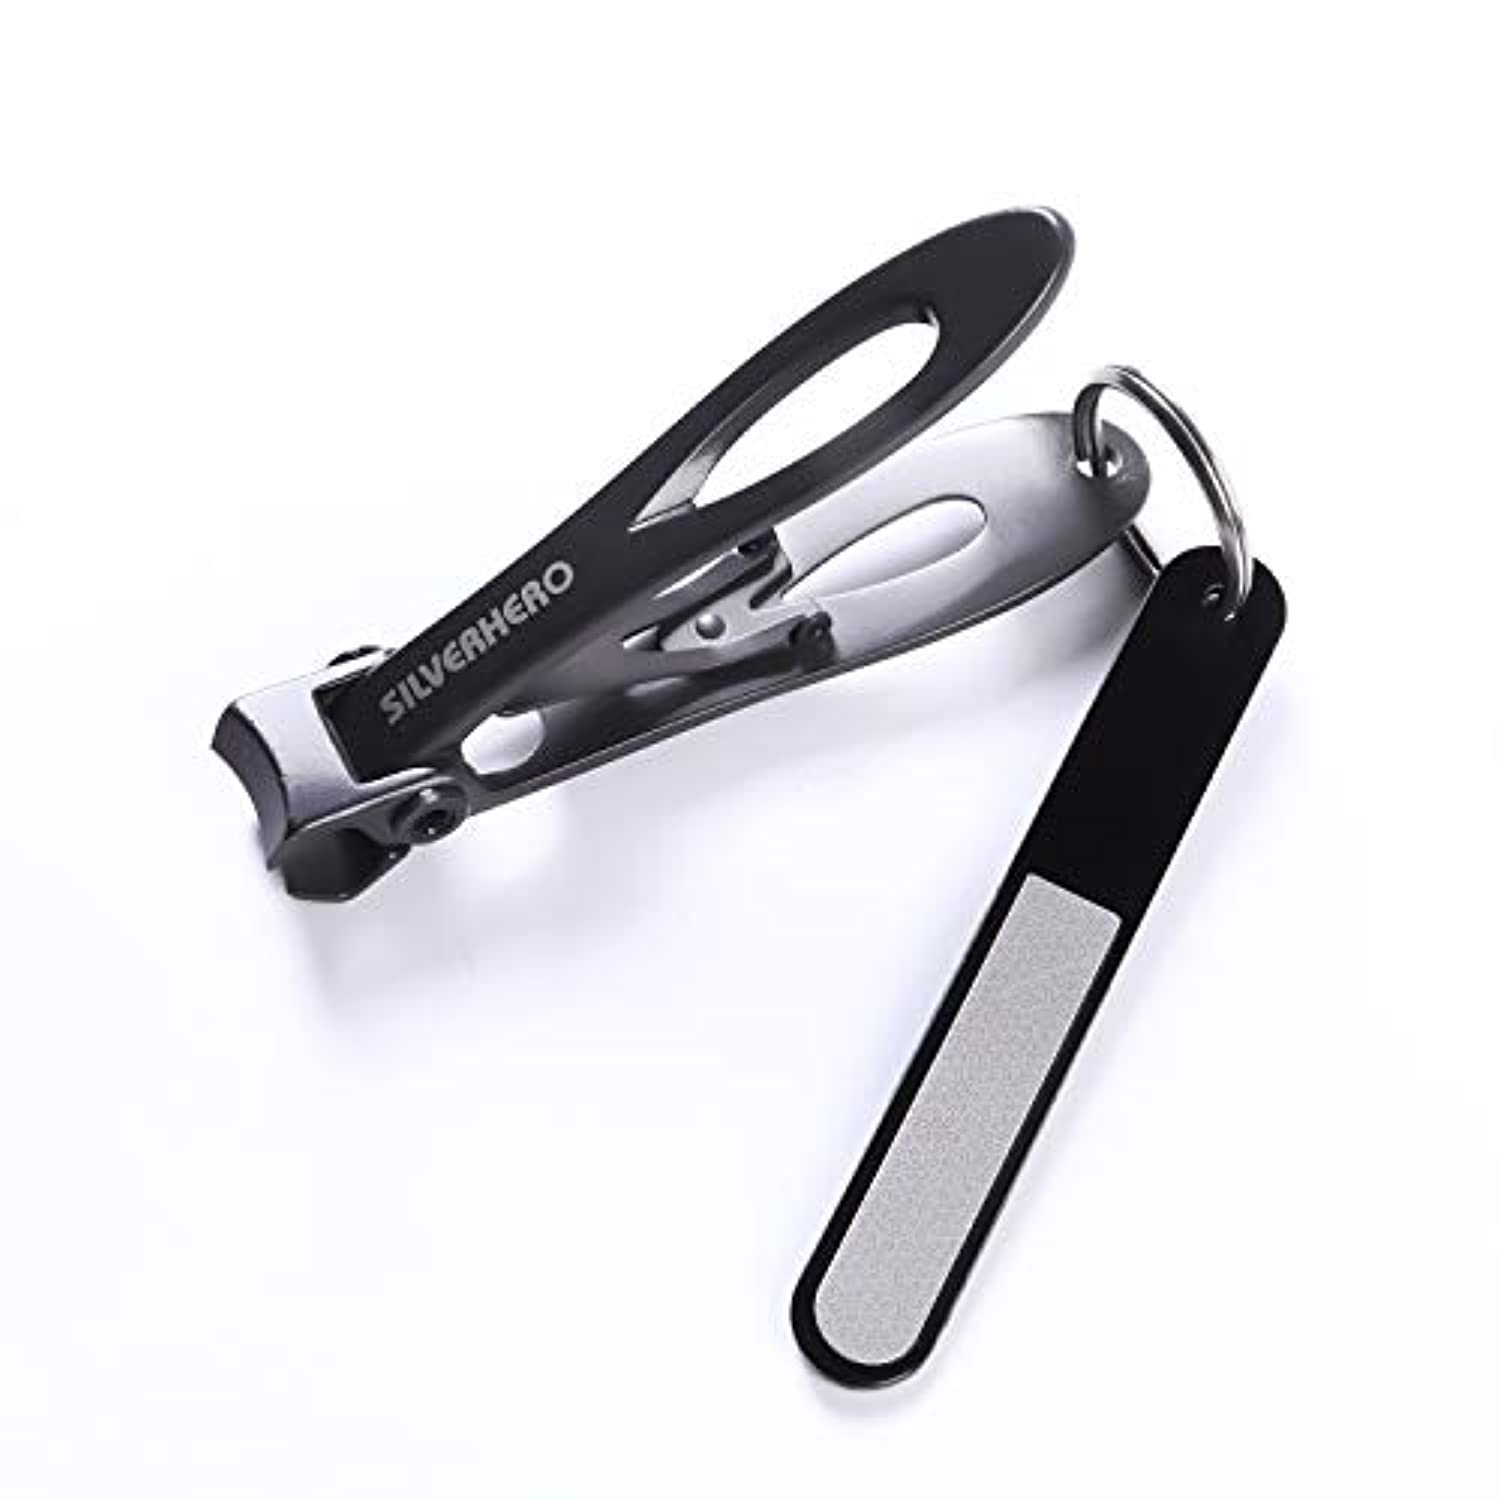 15mm Wide Jaw Opening Deluxe Sturdy Stainless Steel Fingernail Clippers Toenail Clippers for Thick Nails Big Size